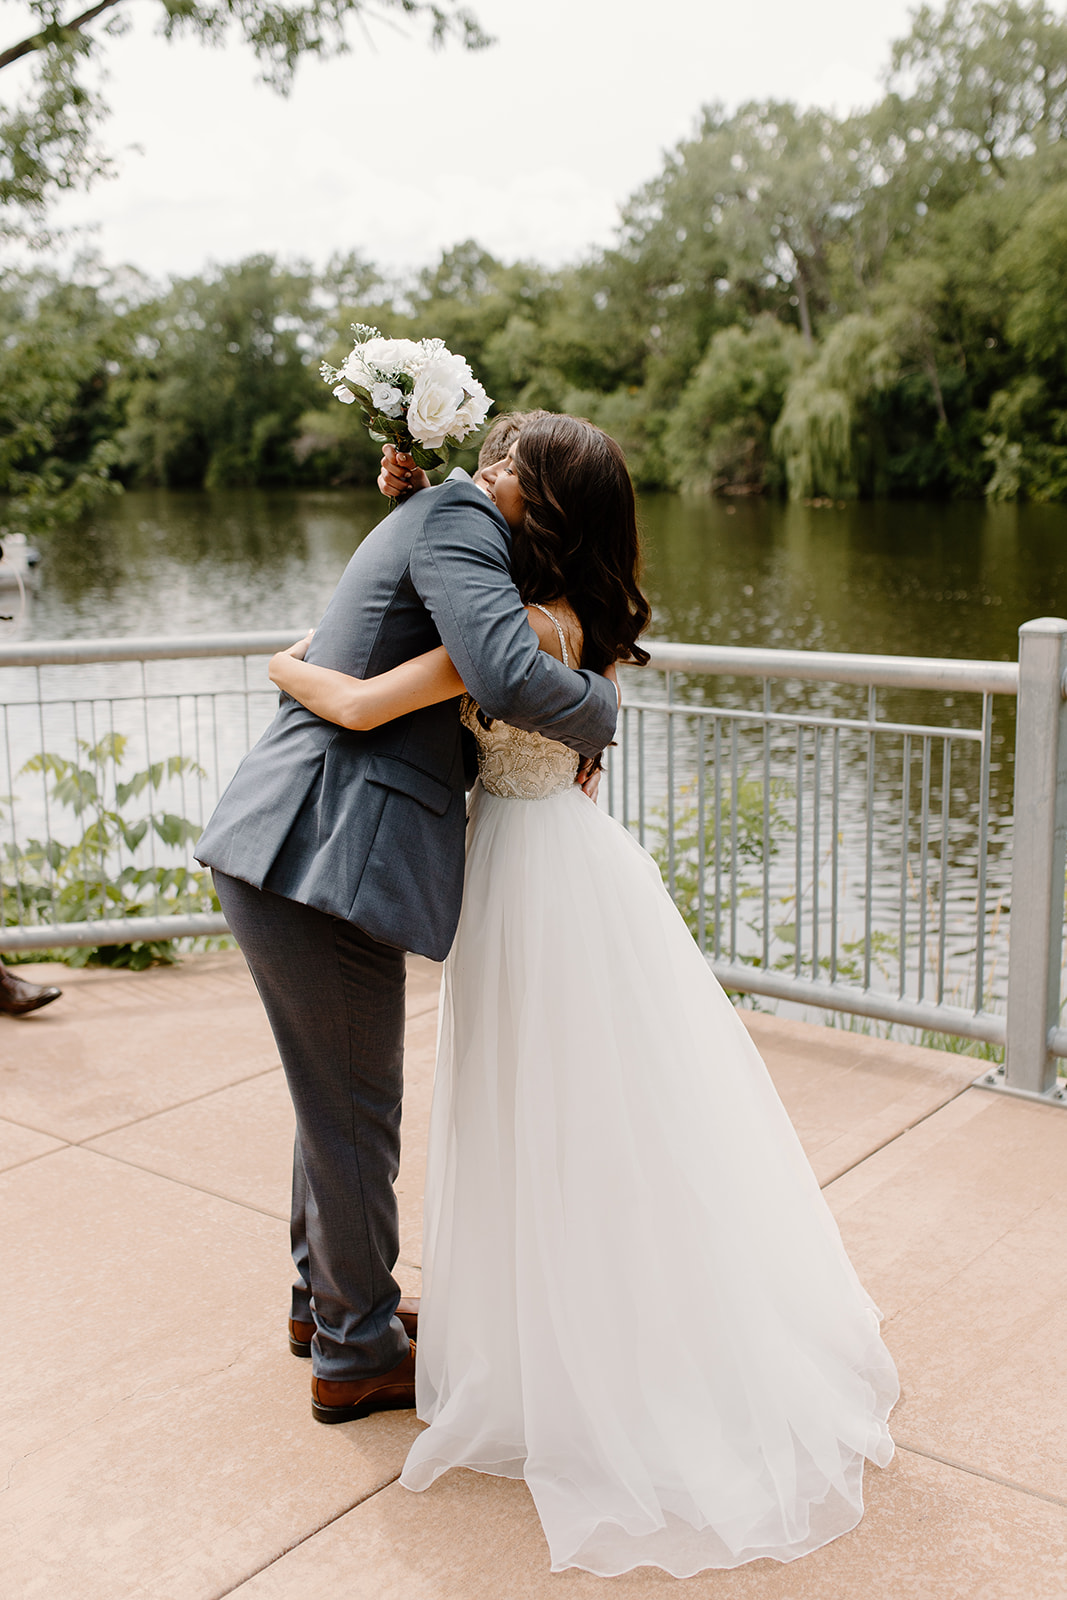 Bride and groom share a hug in front of a river